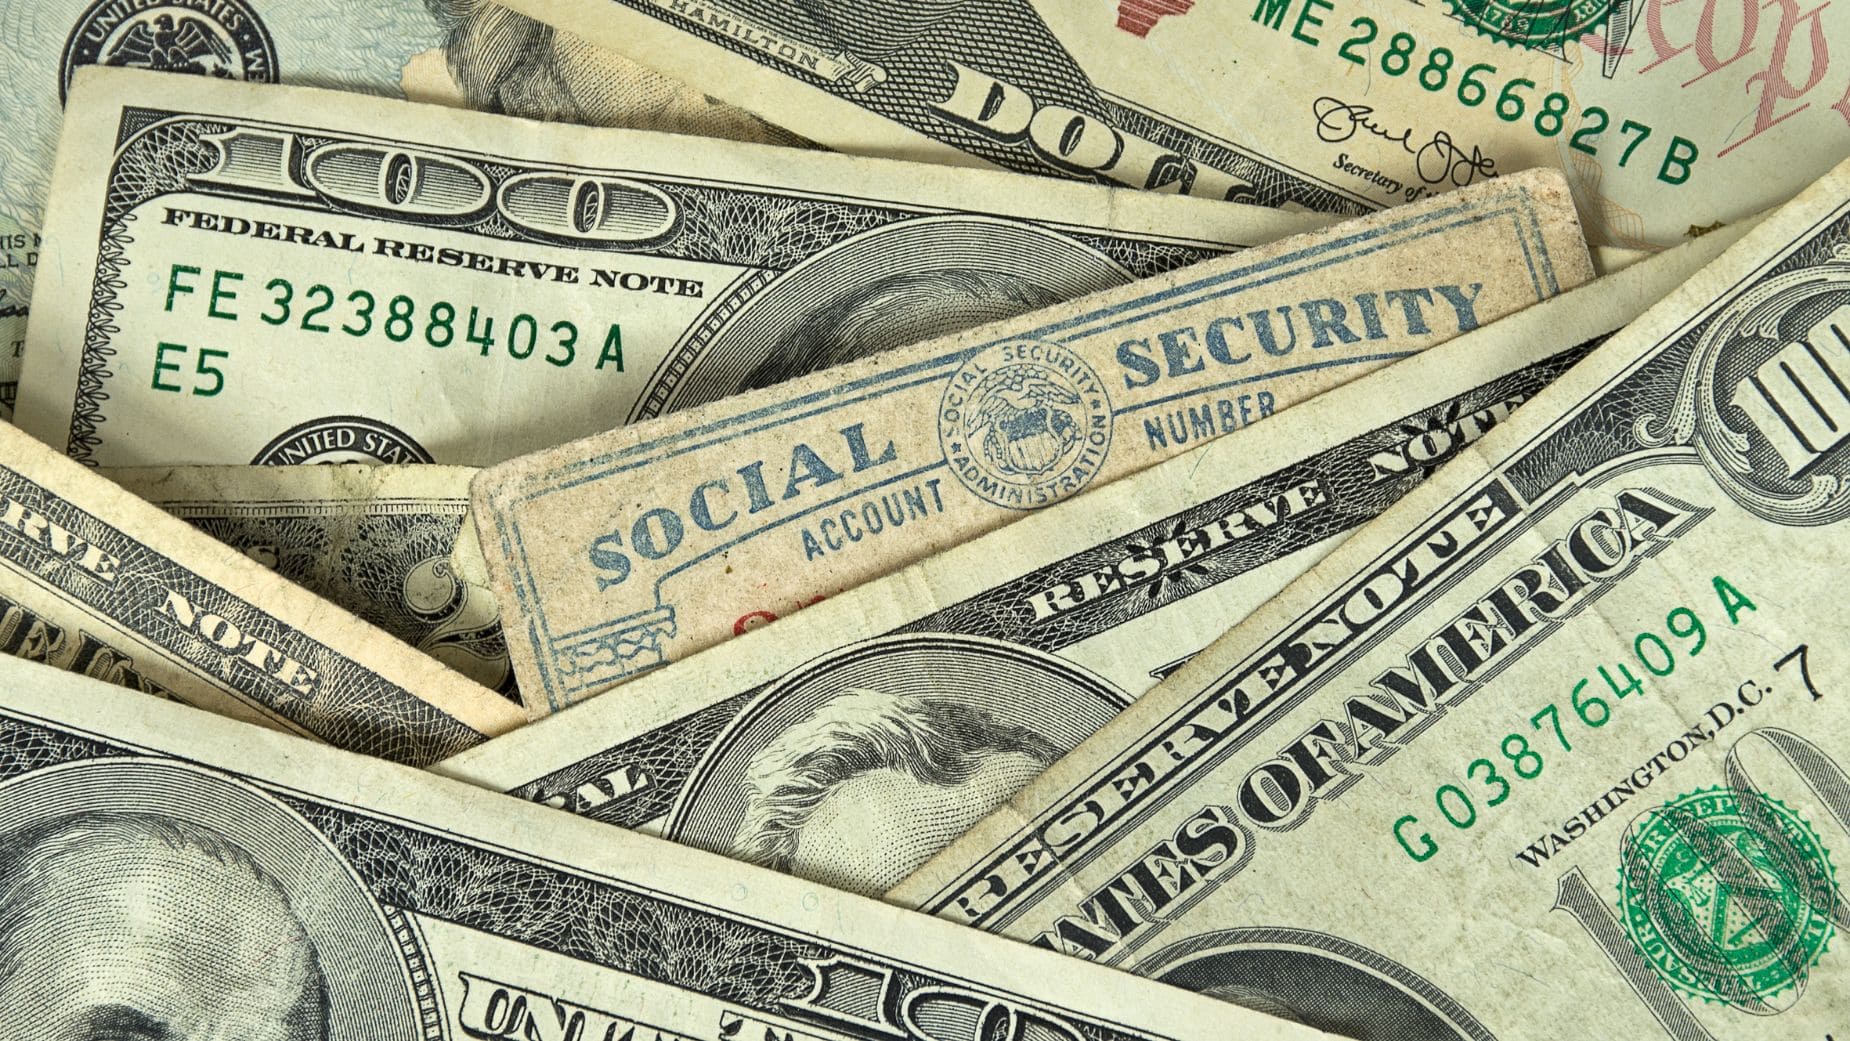 Find out if you will get two Social Security checks in February